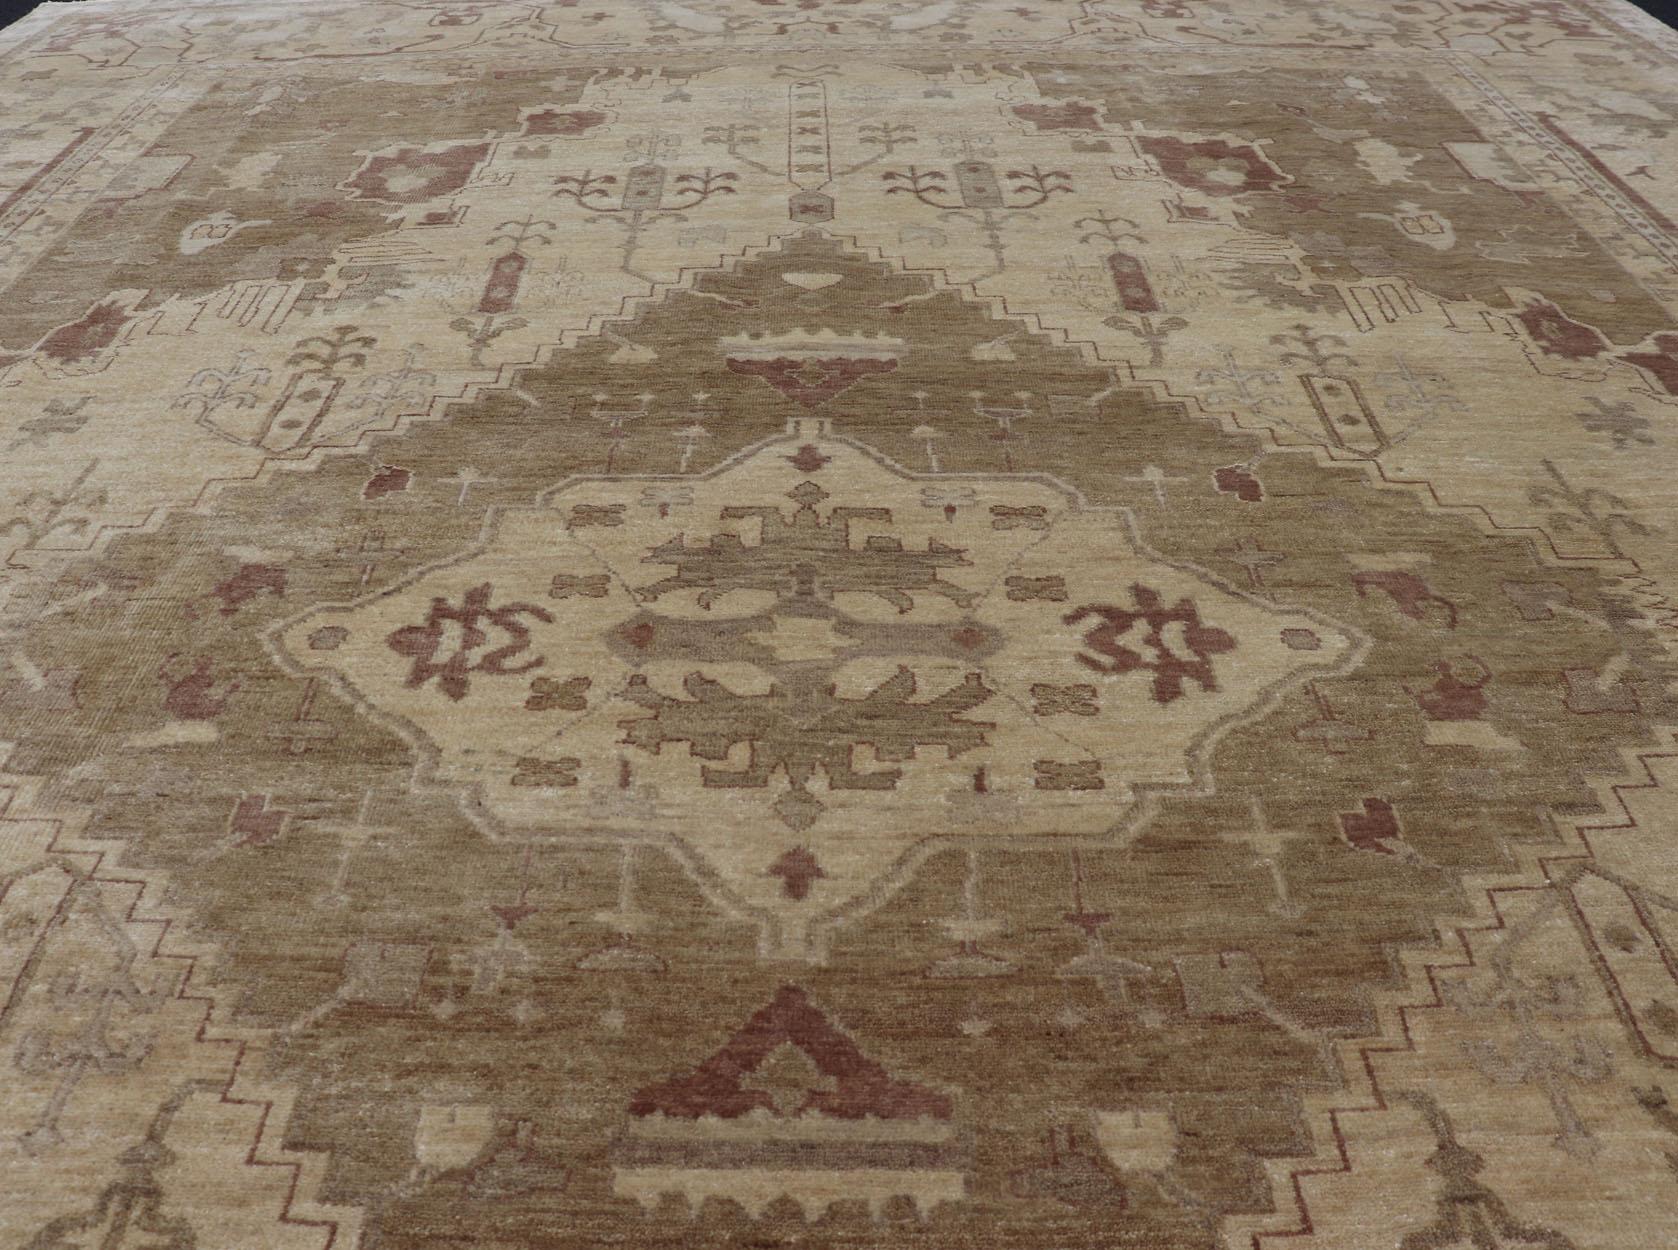 Indian Floral Medallion Oushak Area Rug Hand-Knotted in Tan, Taupe, and Brown. Country of Origin: India; Type: Oushak; Design: All-Over, Floral Medallion; Keivan Woven Arts: rug IN-JVD-6018; Indian Floral Medallion Oushak Area Rug. 
Measures: 10'2 x